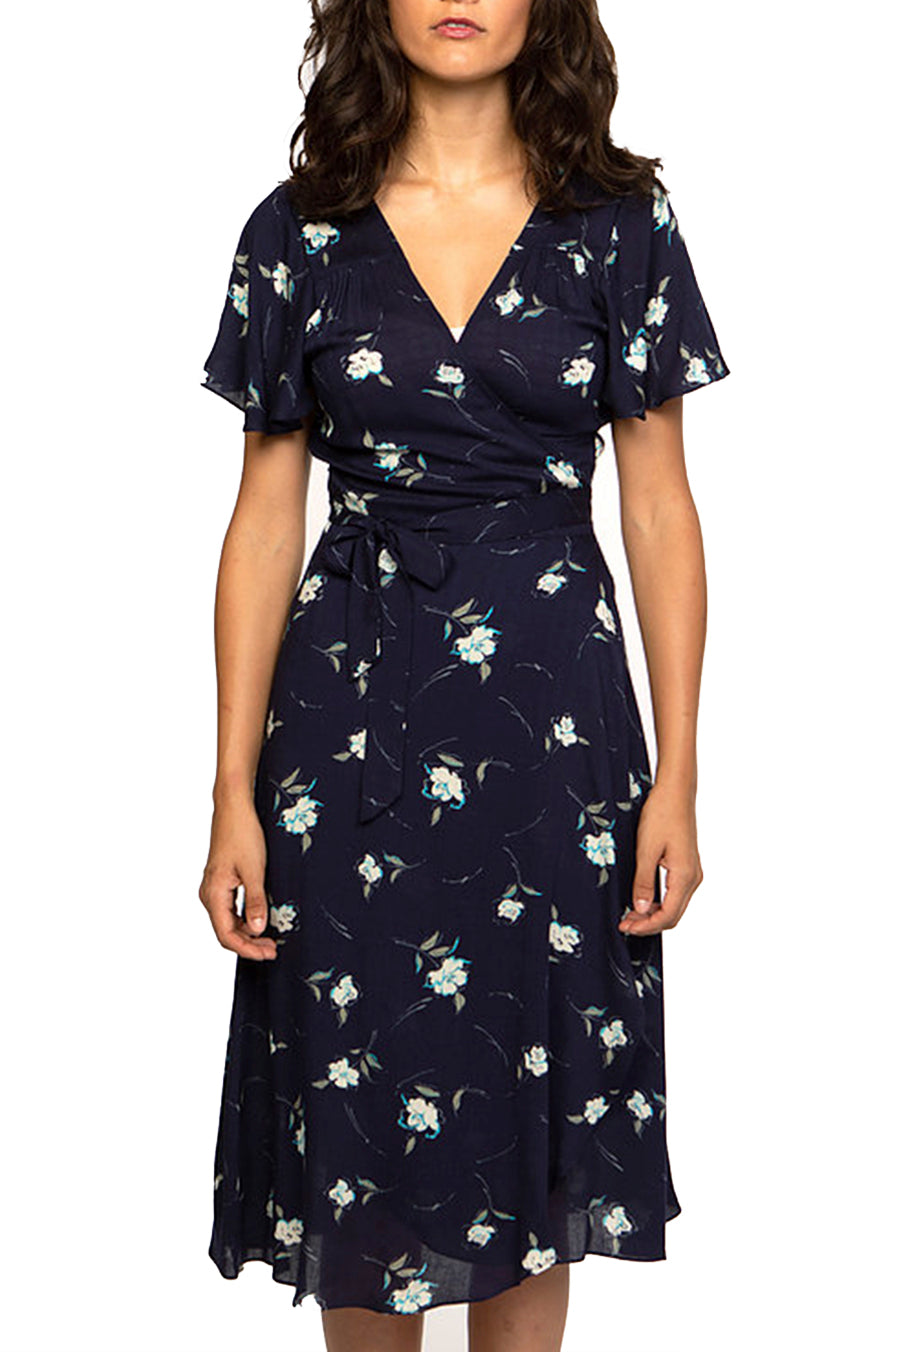 Tiana Navy Floral Wrap Dress by Cameo ...